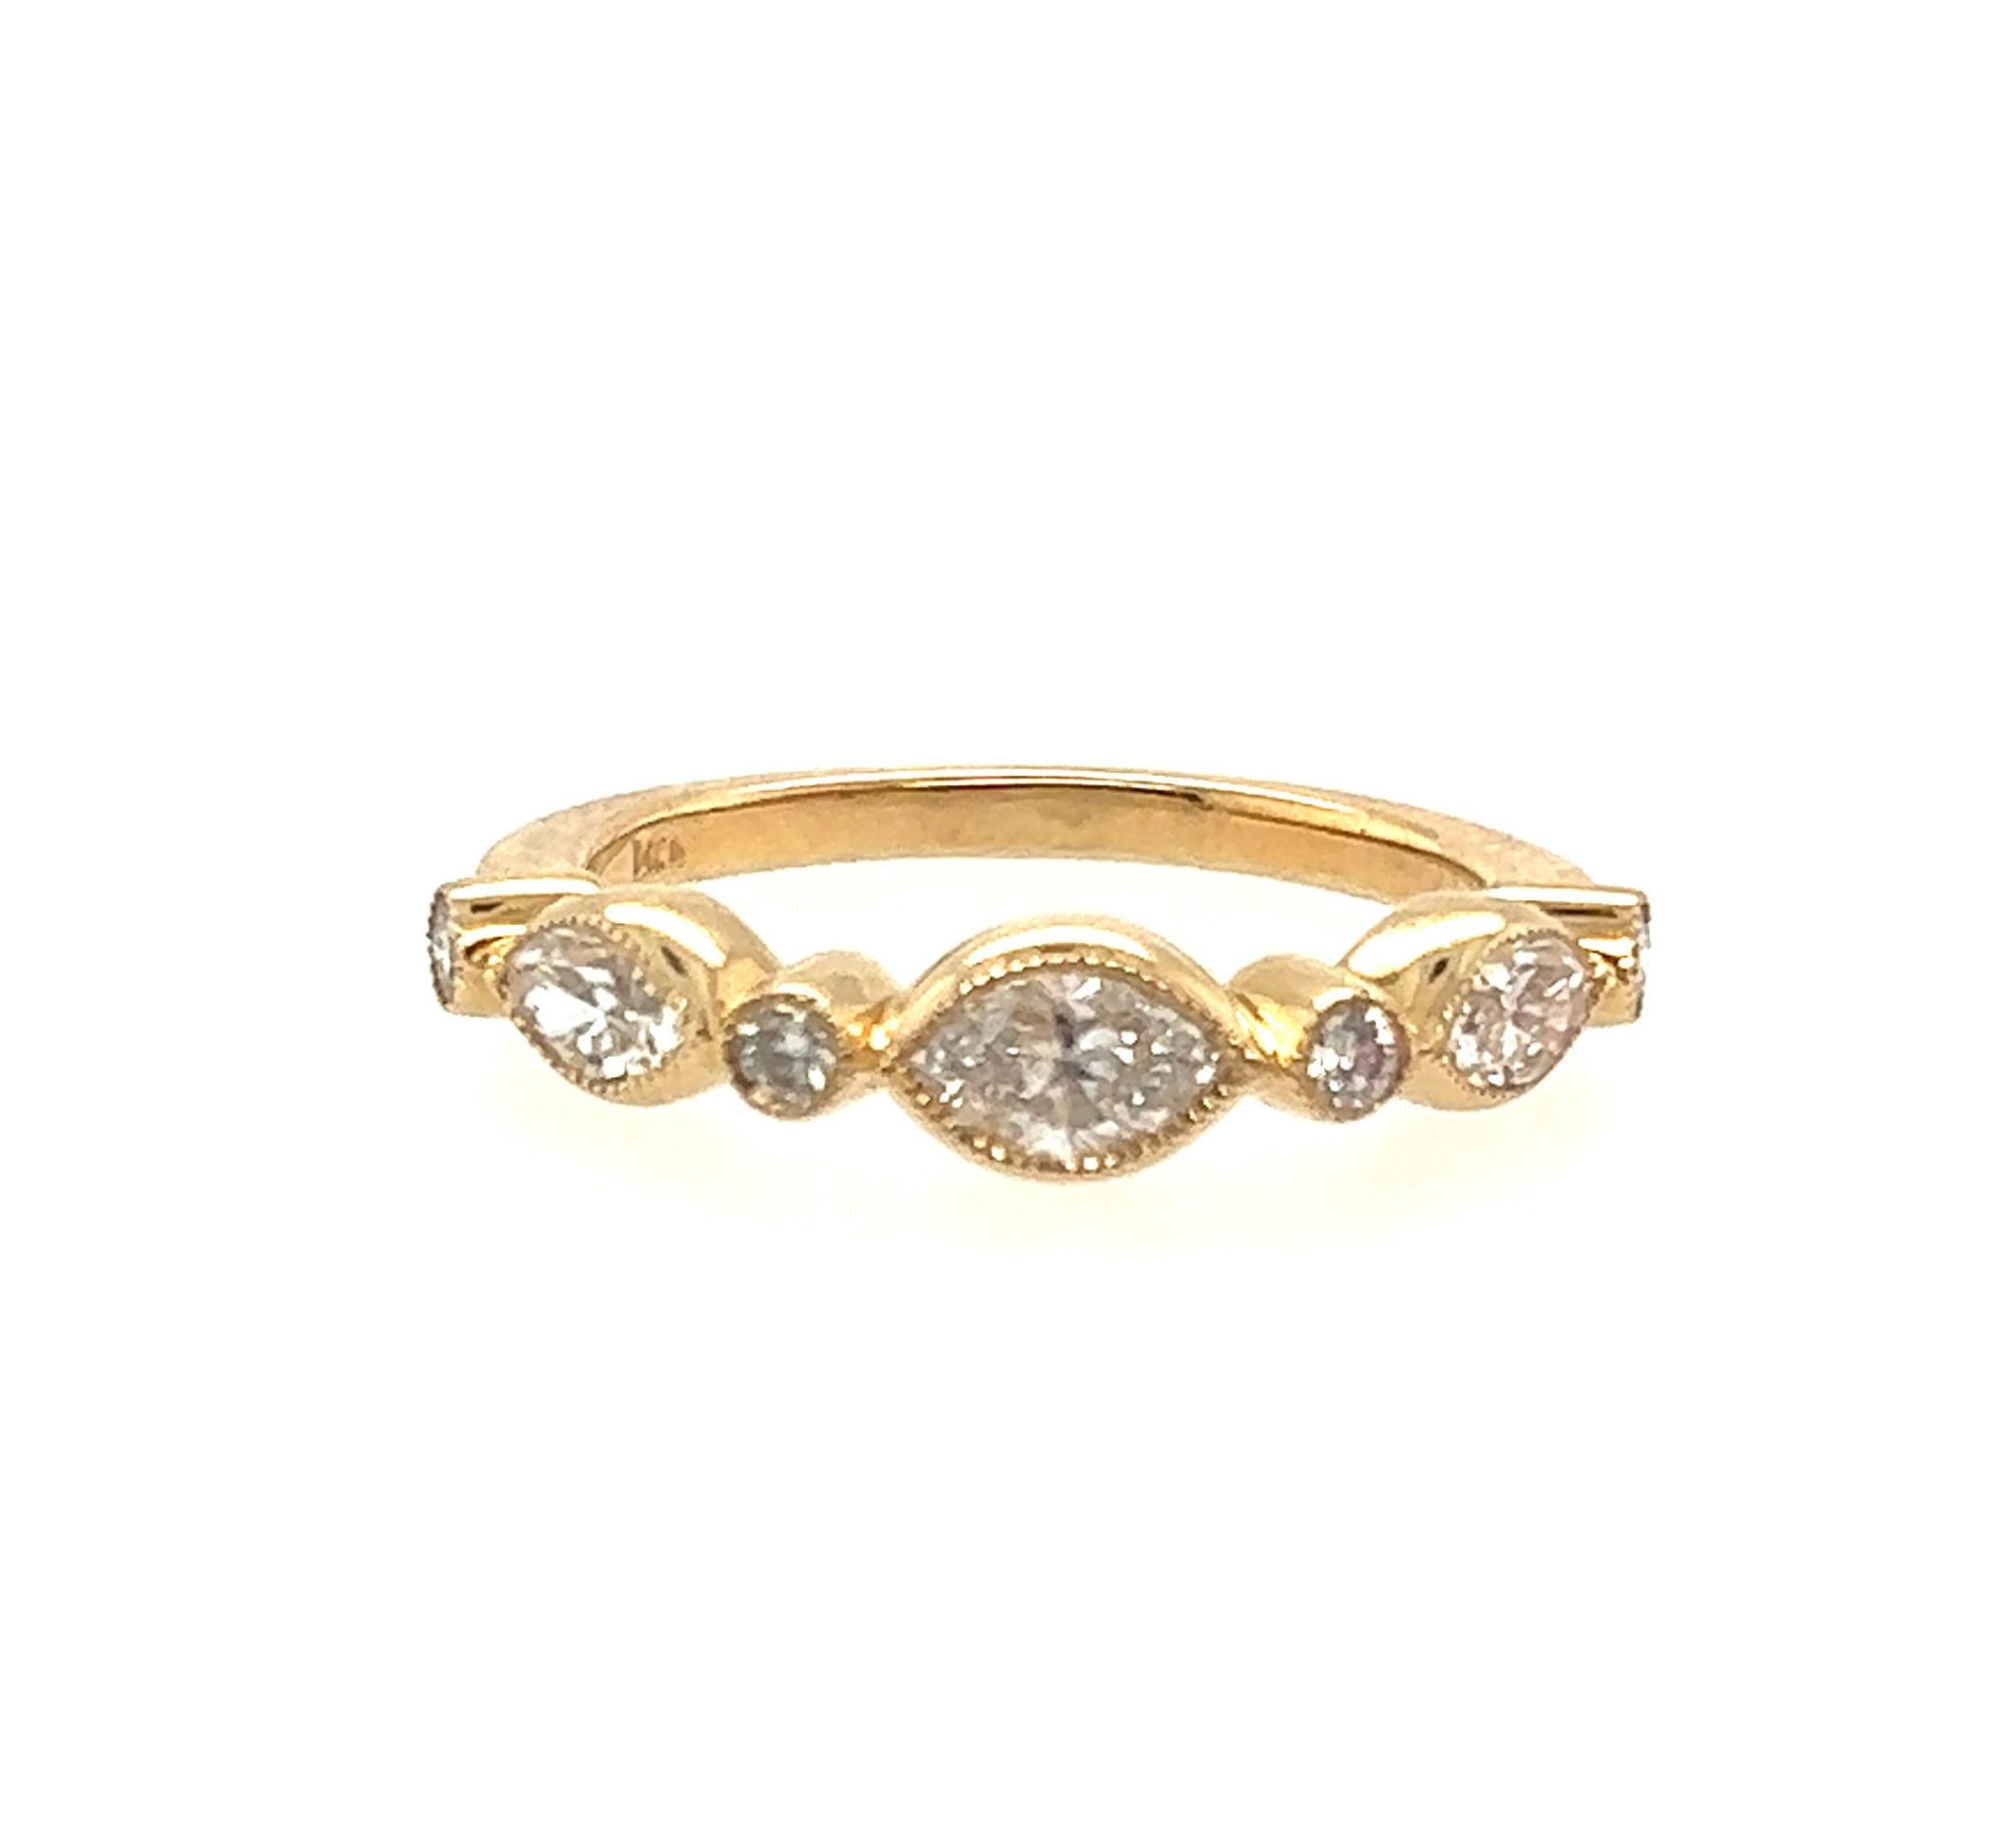 Diamond Anniversary Band .97ct 14K Yellow Gold Wedding Ring


Solid 14K Yellow Gold 

100% Natural Diamonds

.97 Carat Diamond Weight

Great Band to Stack

Matches Any Engagement Ring 

Perfect for a Birthday or Anniversary Gift

Brand